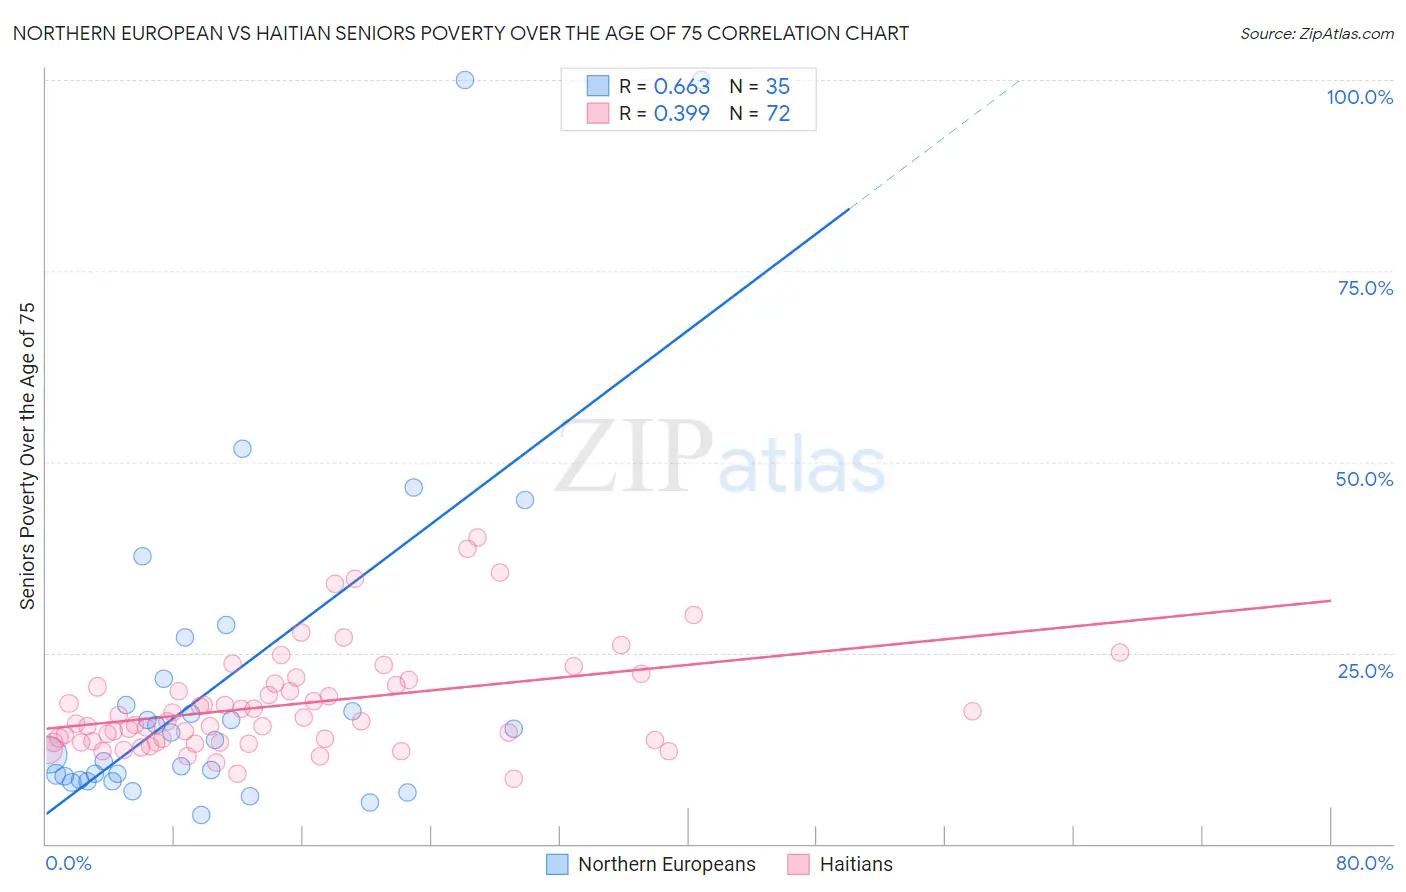 Northern European vs Haitian Seniors Poverty Over the Age of 75